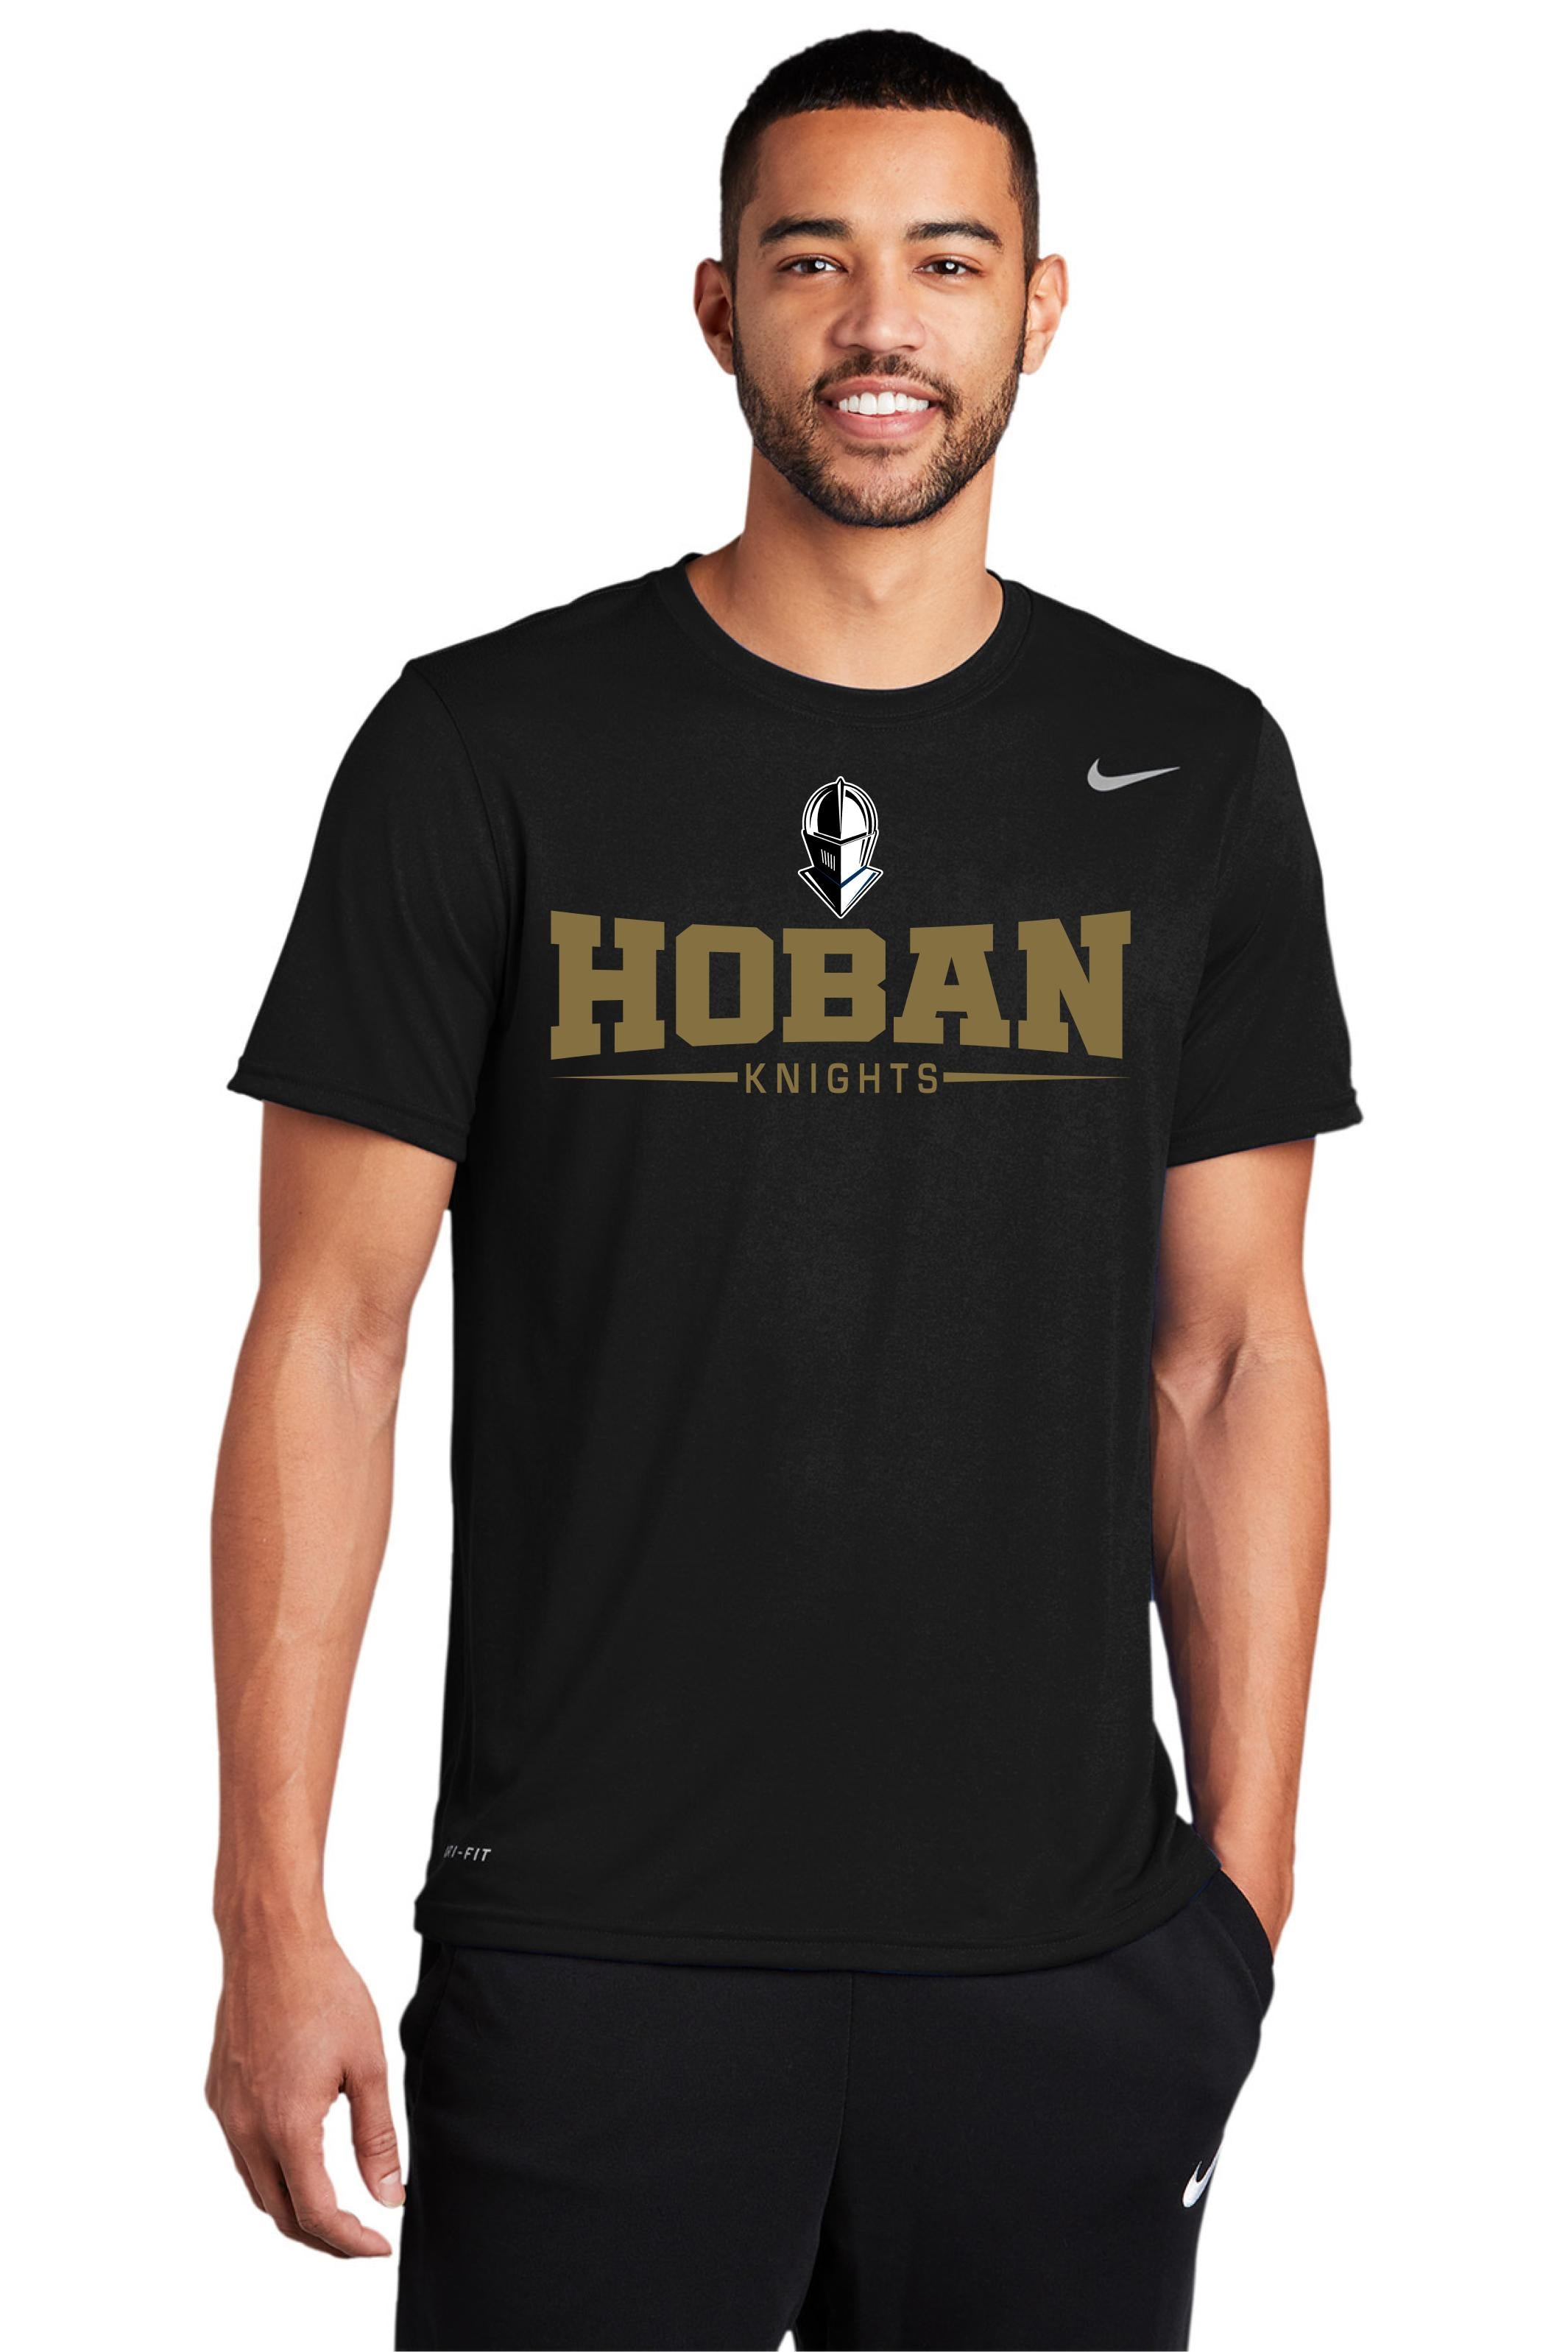 Short Sleeve T Shirt by Nike (click for more color options)